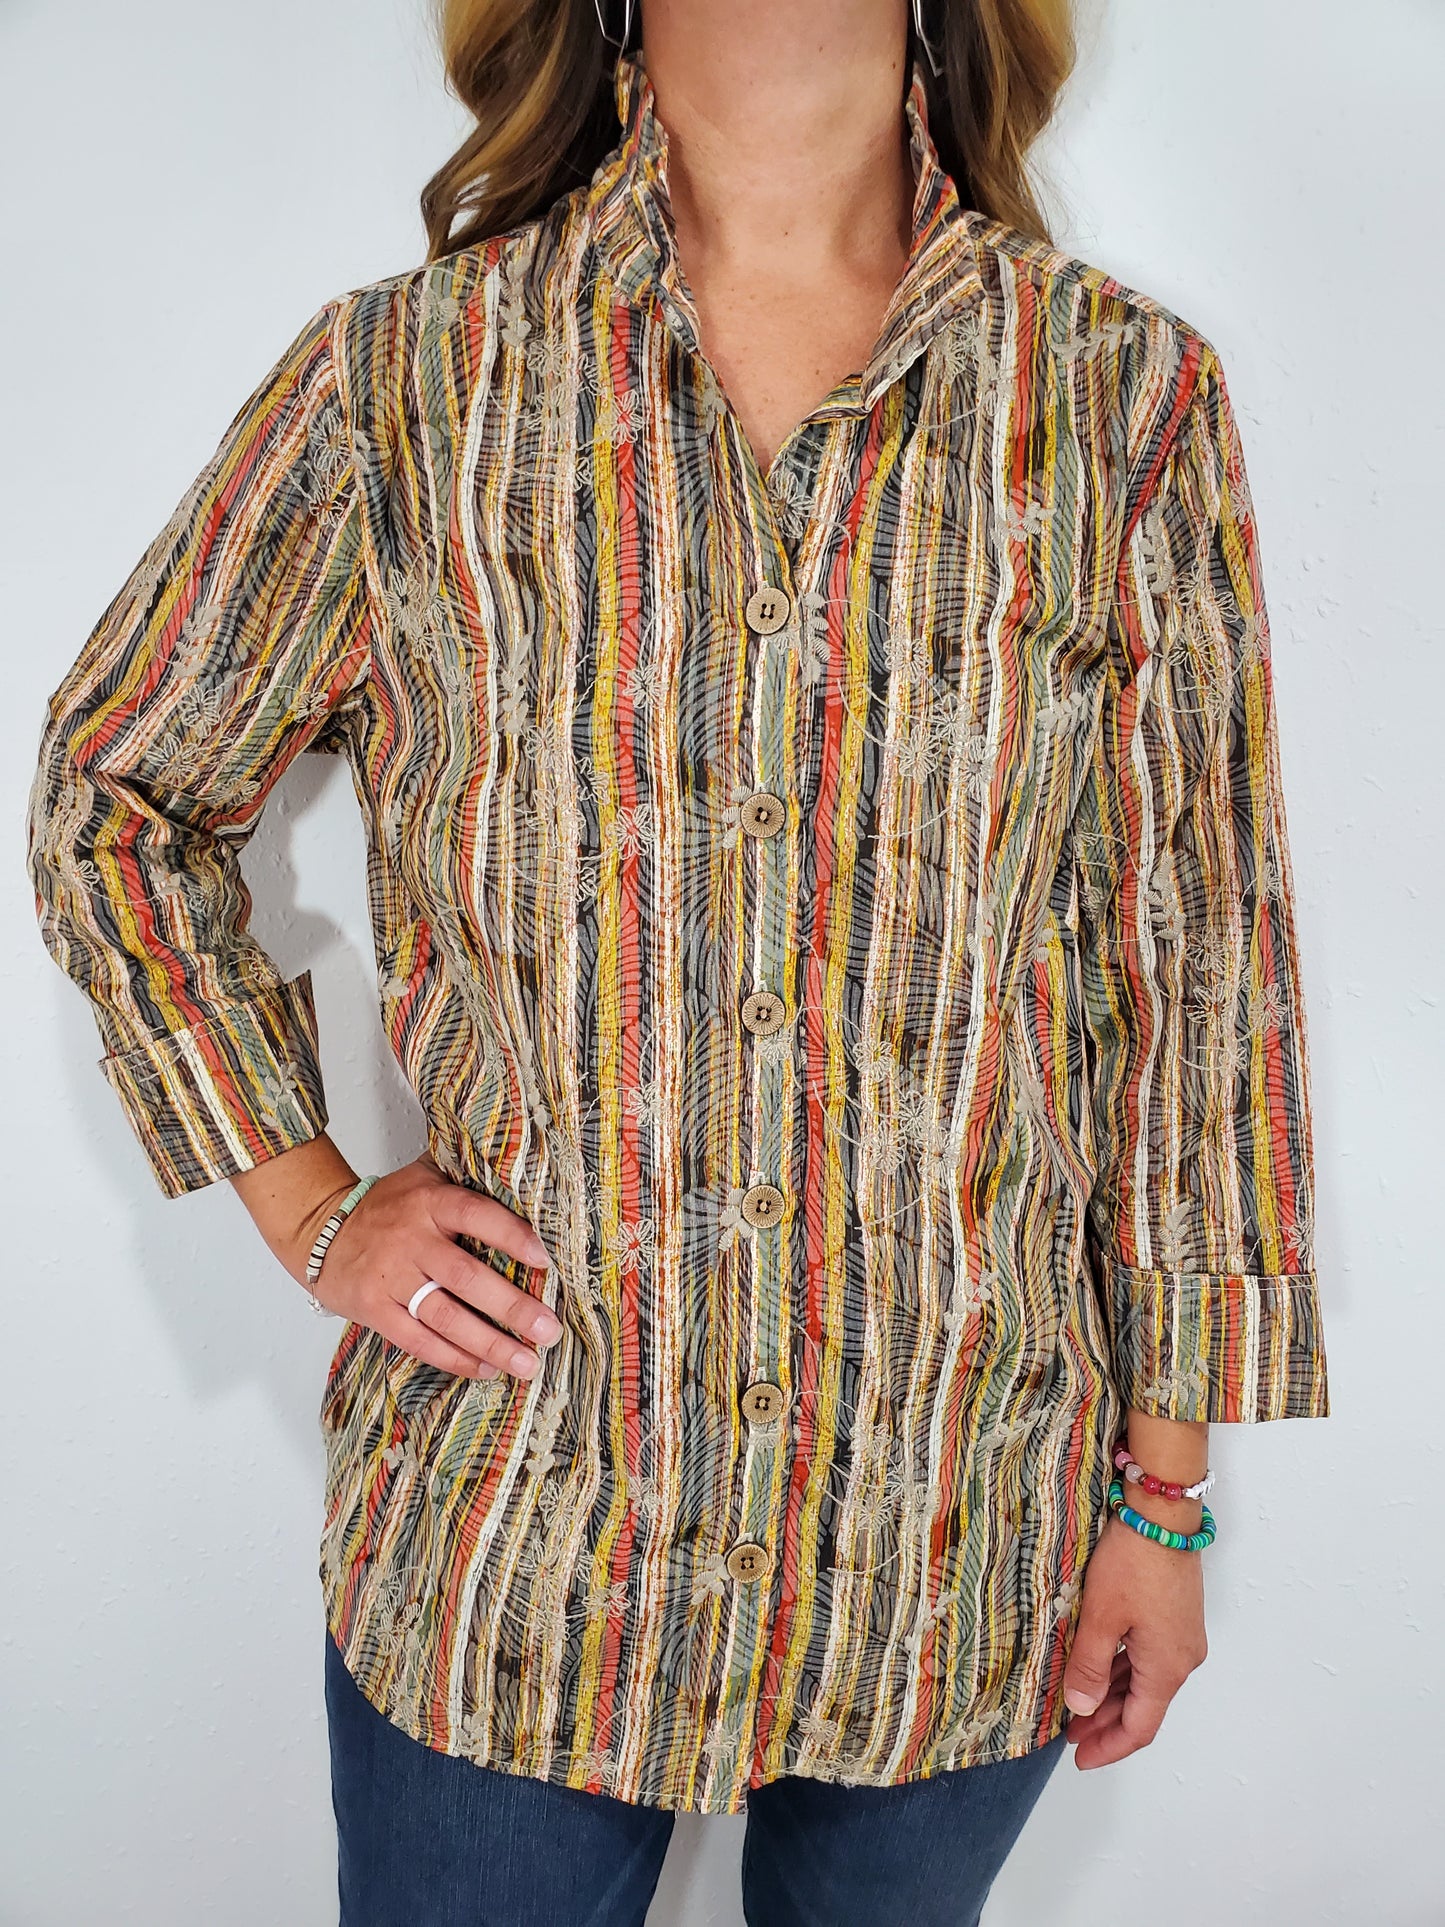 EMBROIDERED BUTTON UP BLOUSE - TAN MULTI